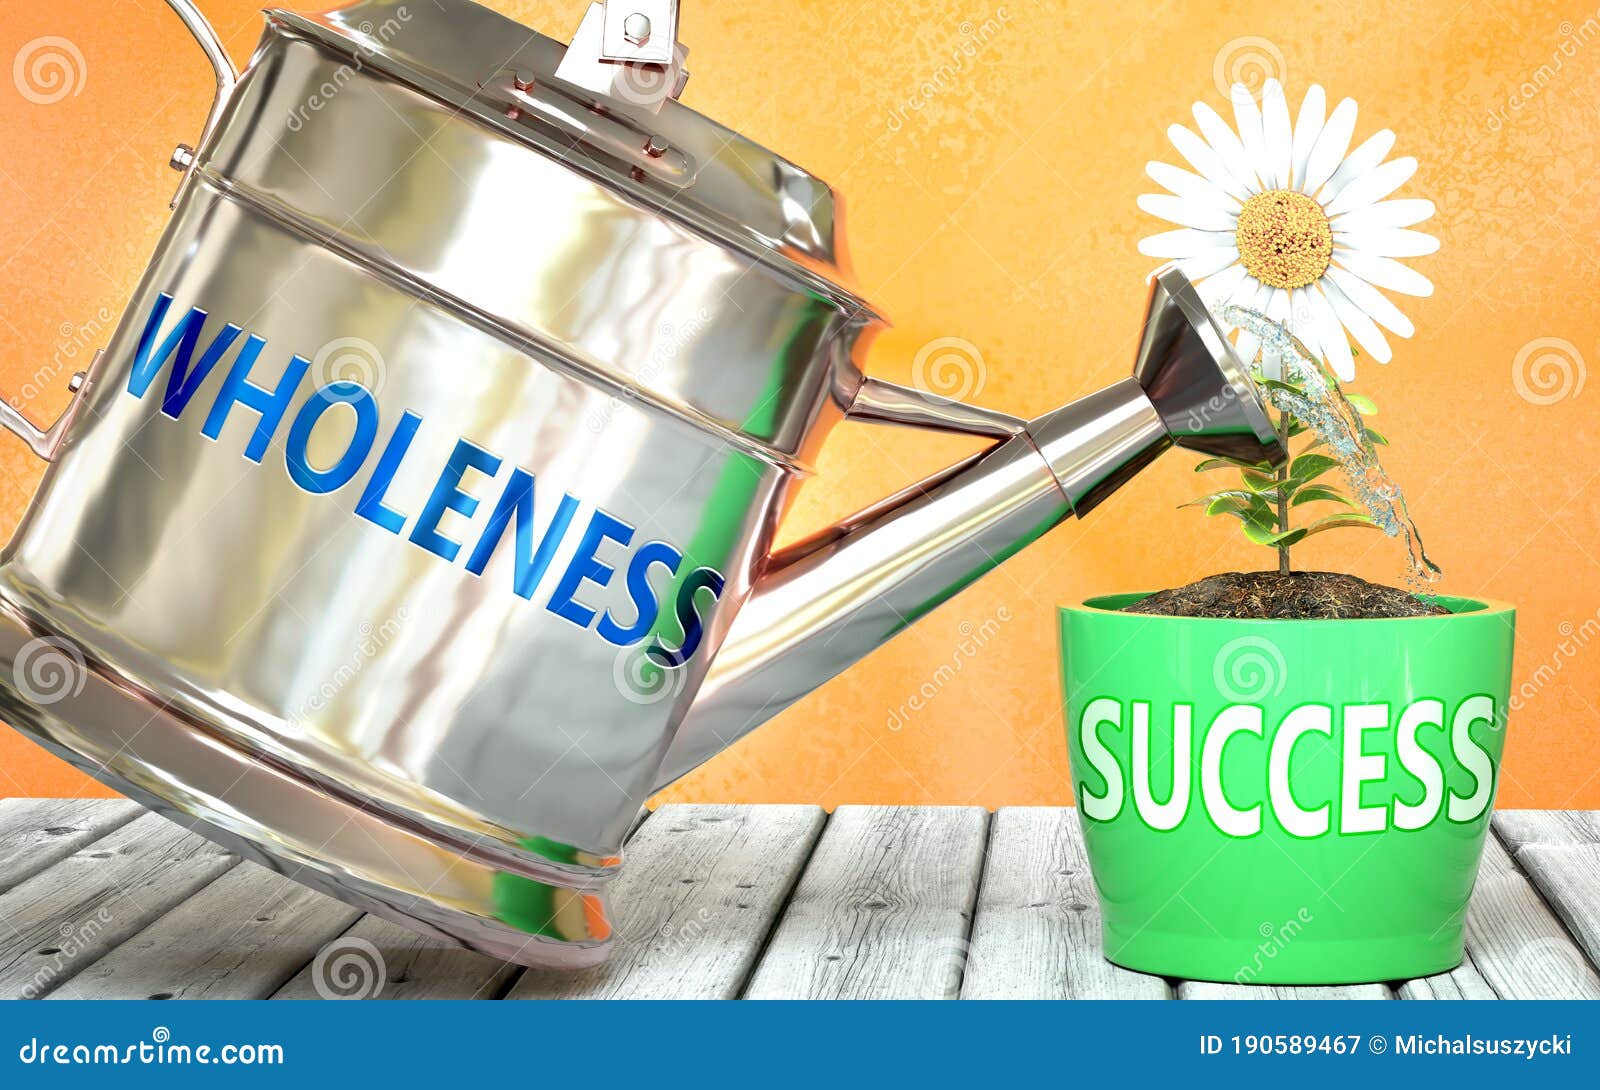 wholeness helps achieving success - pictured as word wholeness on a watering can to ize that wholeness makes success grow